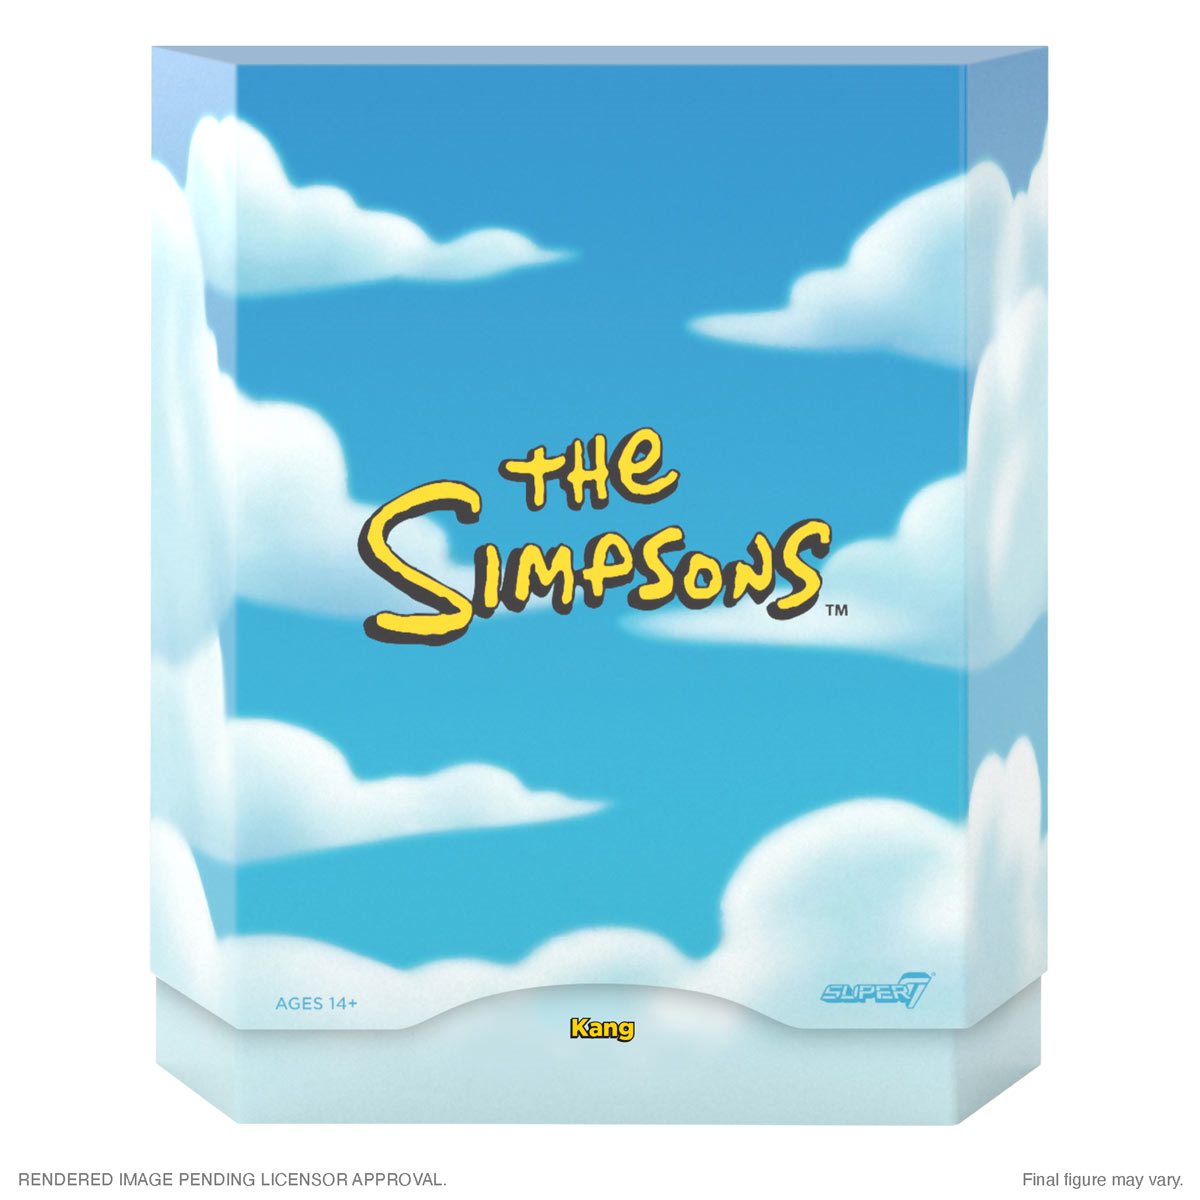 Super7 Ultimates: The Simpson - Kang